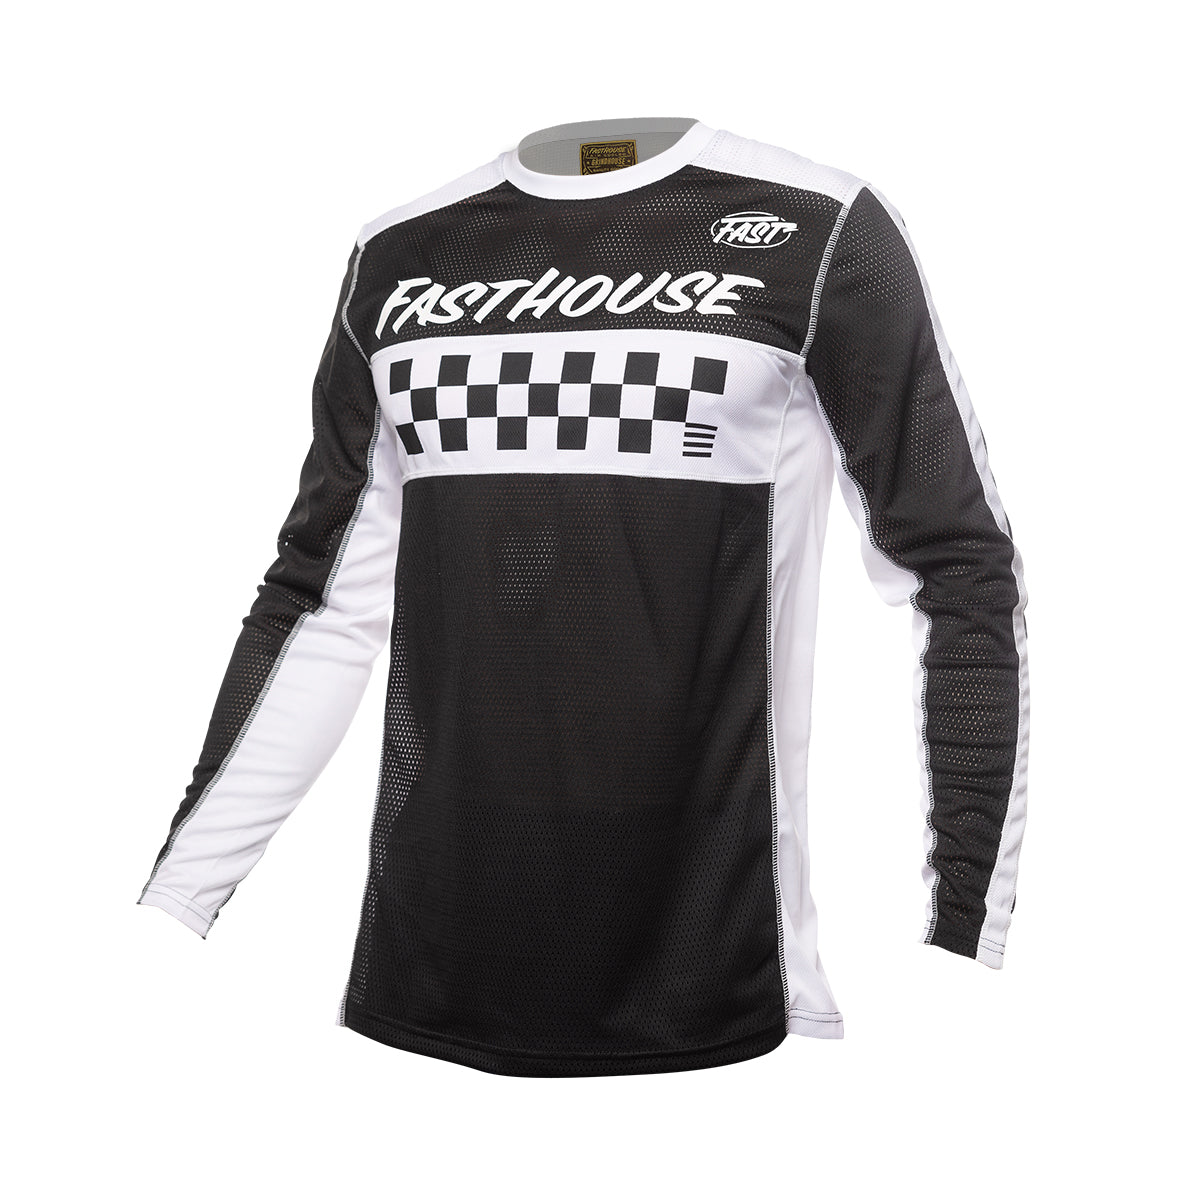 Grindhouse Waypoint Youth Jersey - Black/White